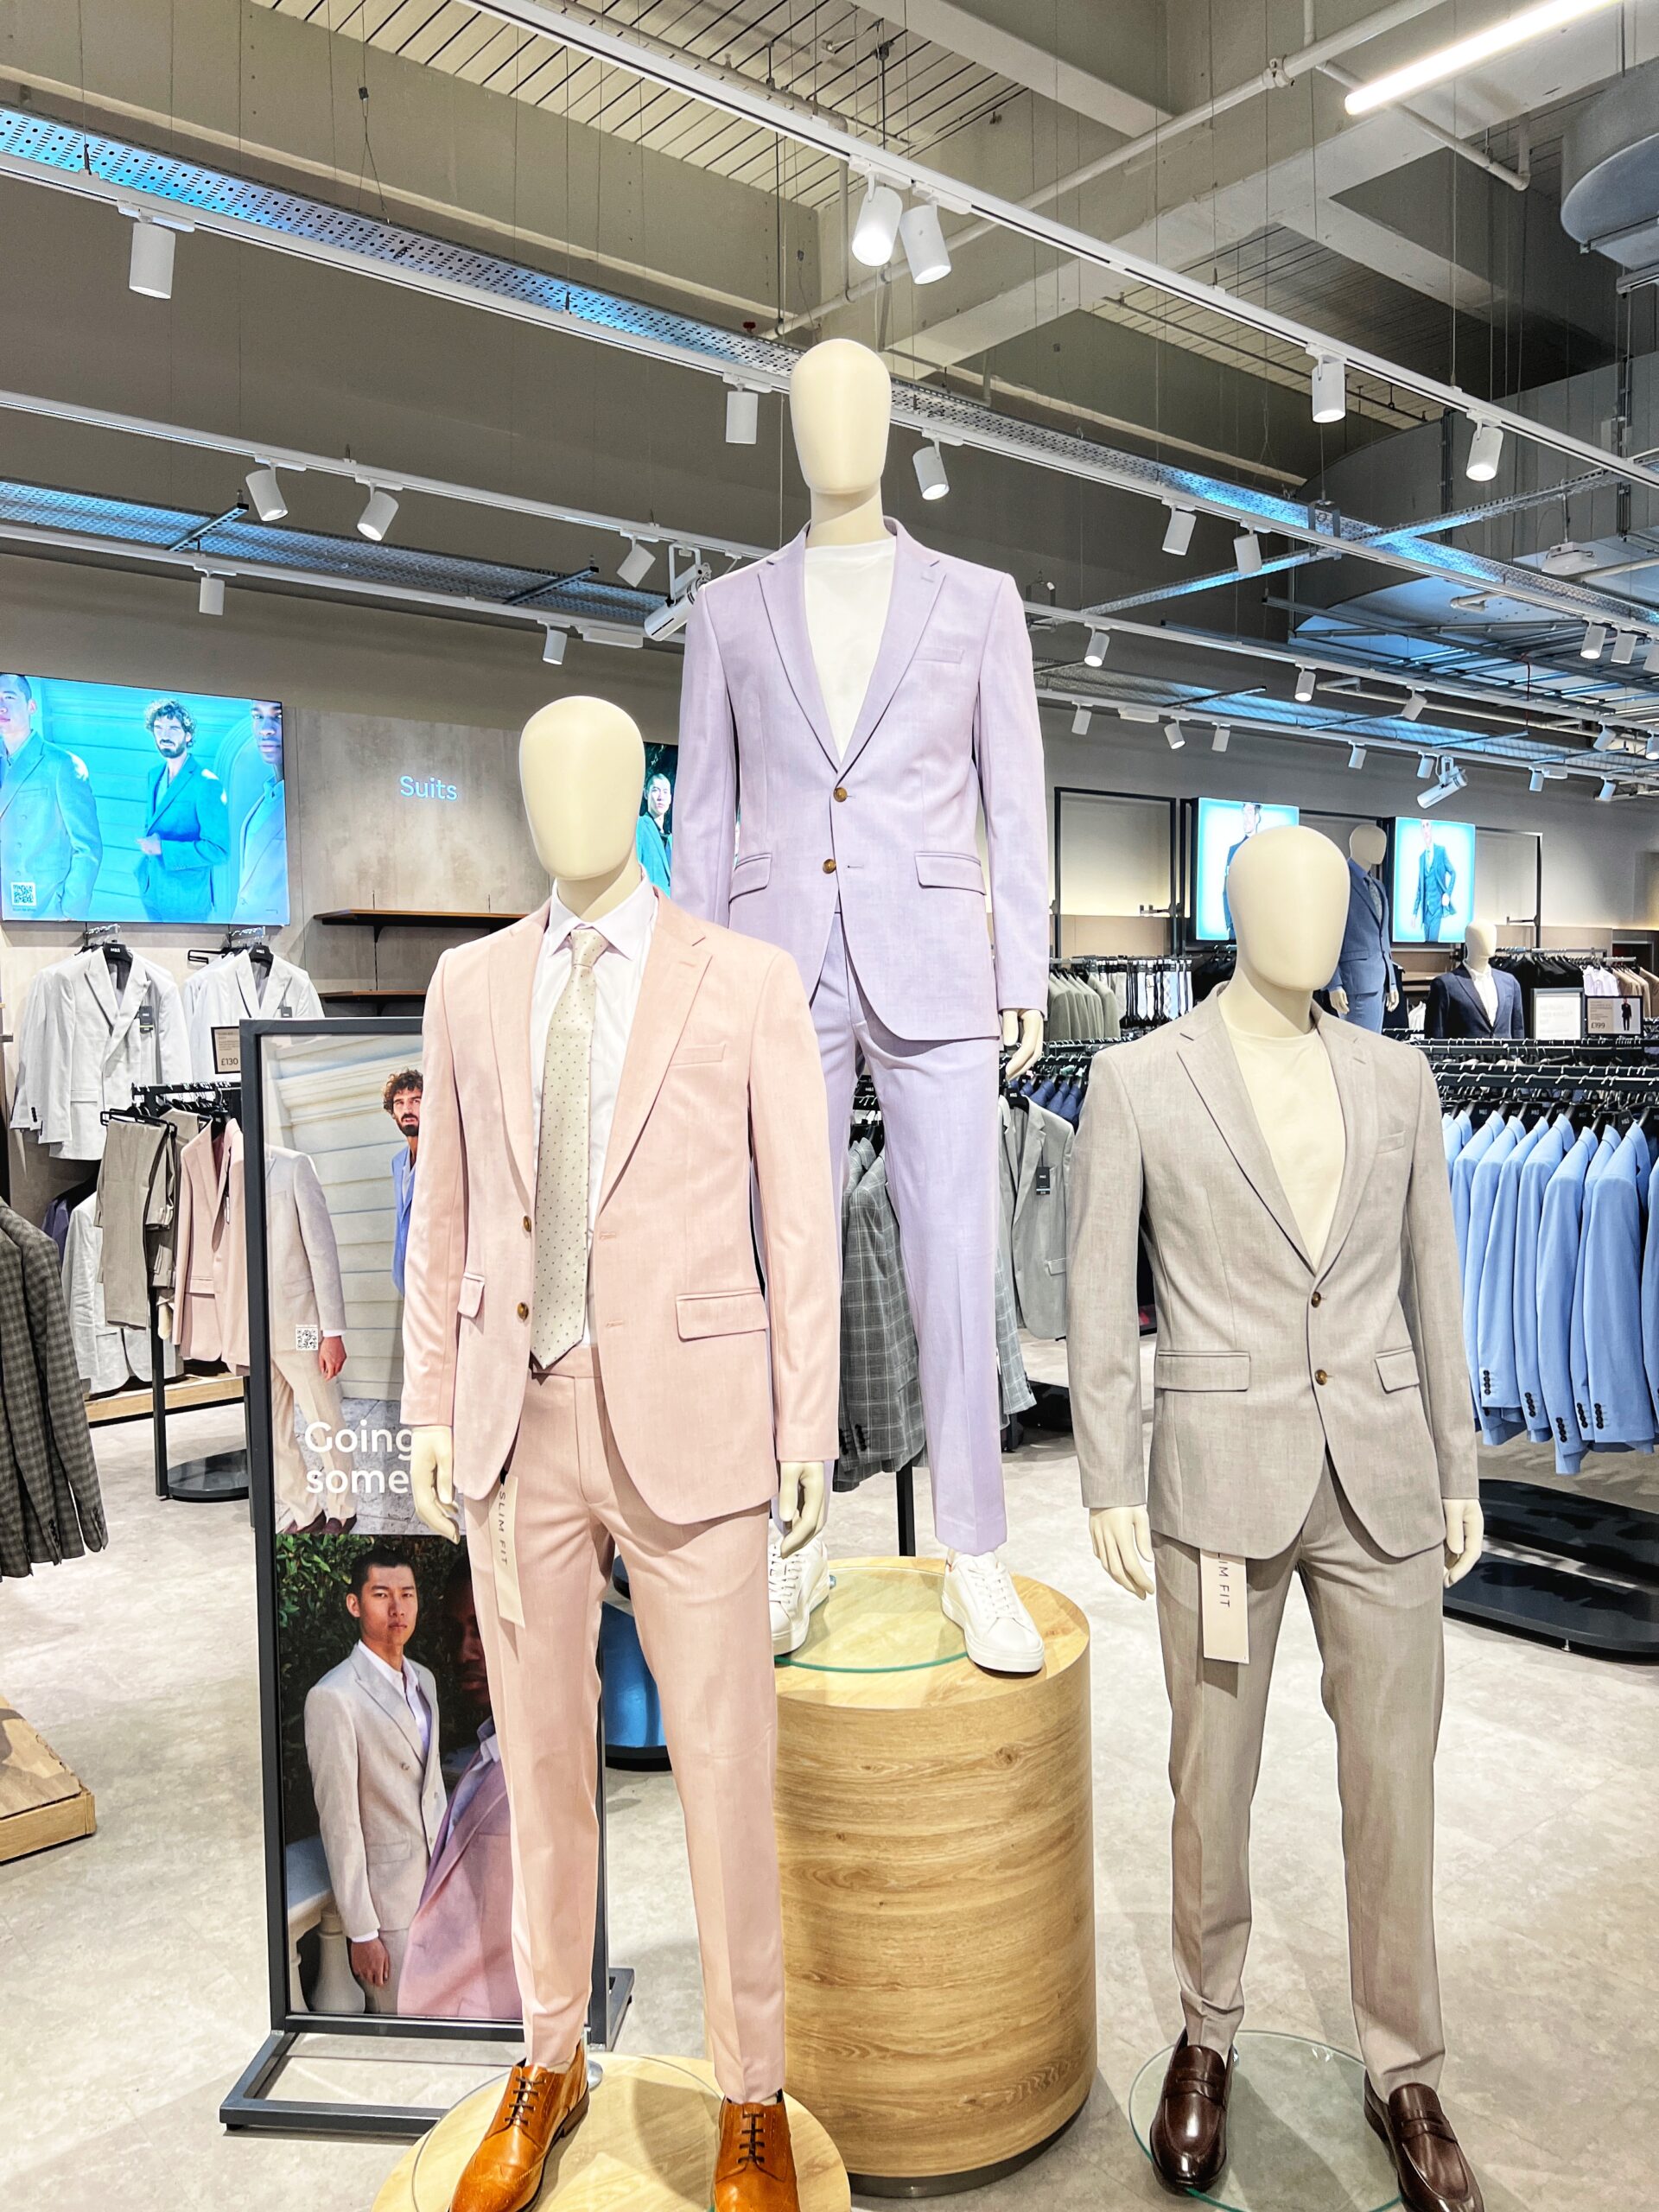 The suit section at the stunning new M&S Trafford Centre store. Credit: The Manc Group